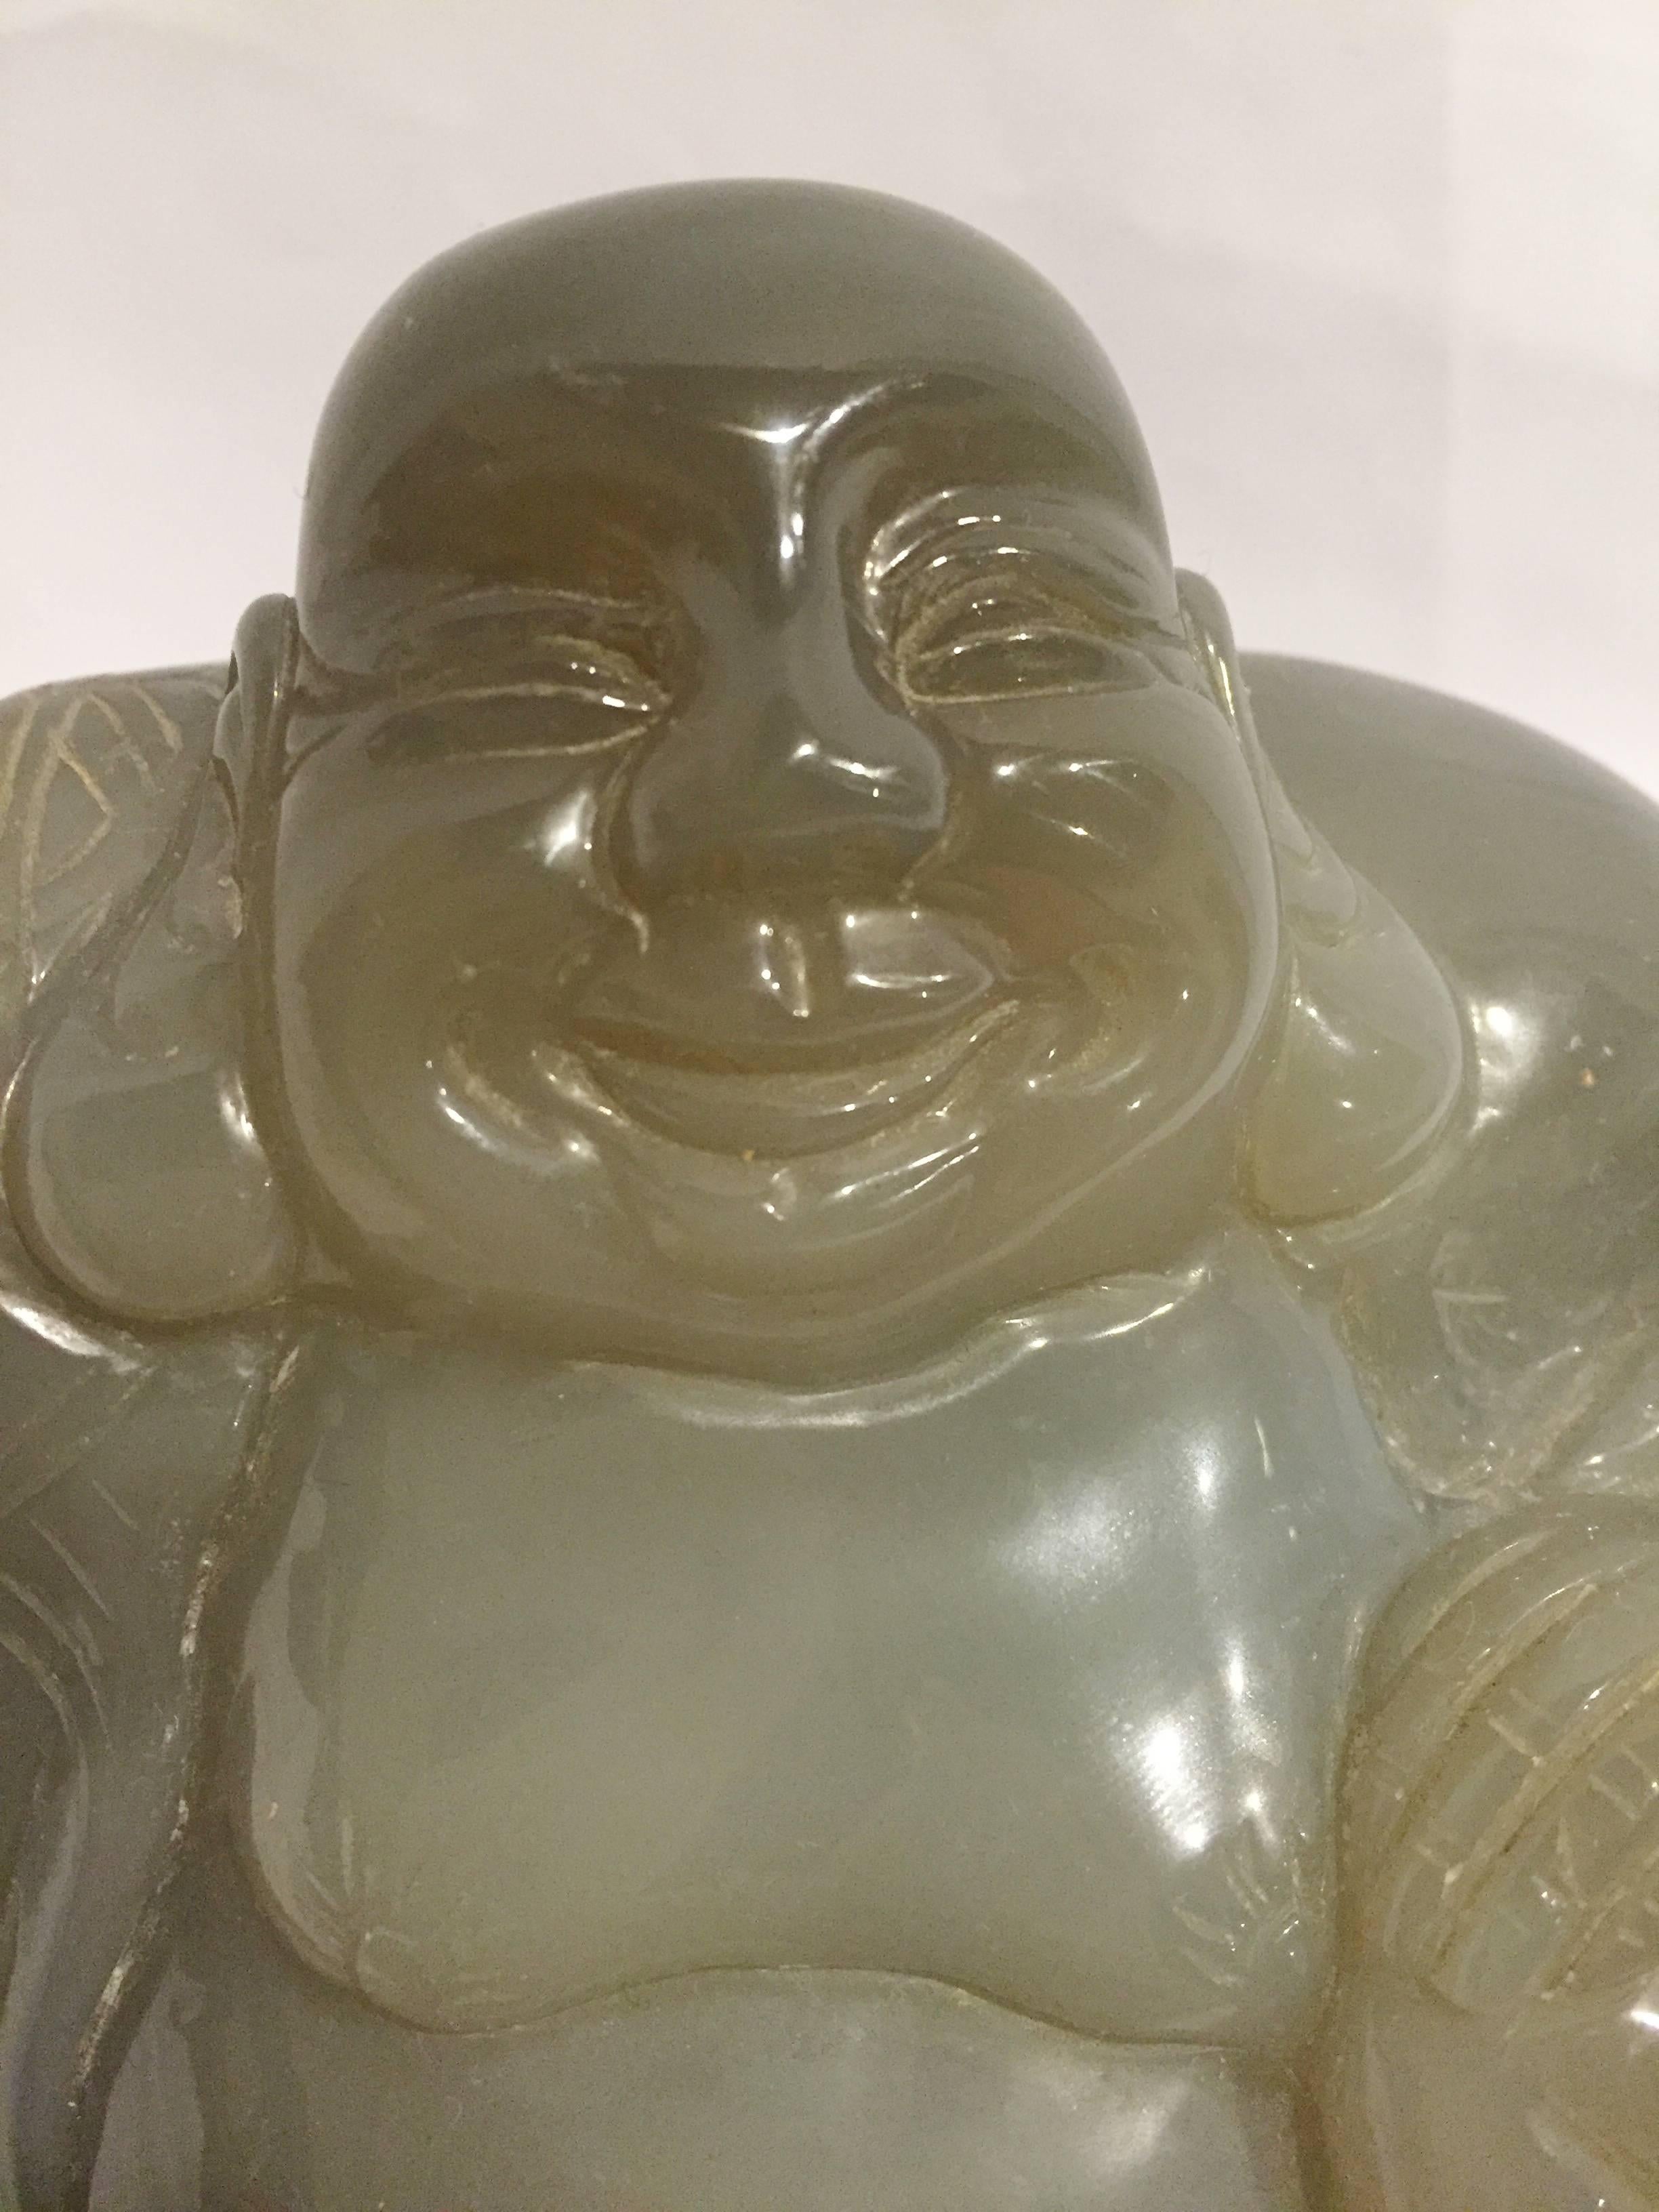 This is an exceptionally large and first grade natural agate specimen that is hand-carved into a beautiful Happy Buddha. 

The depiction is fine with details on the robe and facial features. The sculpture reflects agate's natural luster. 

One